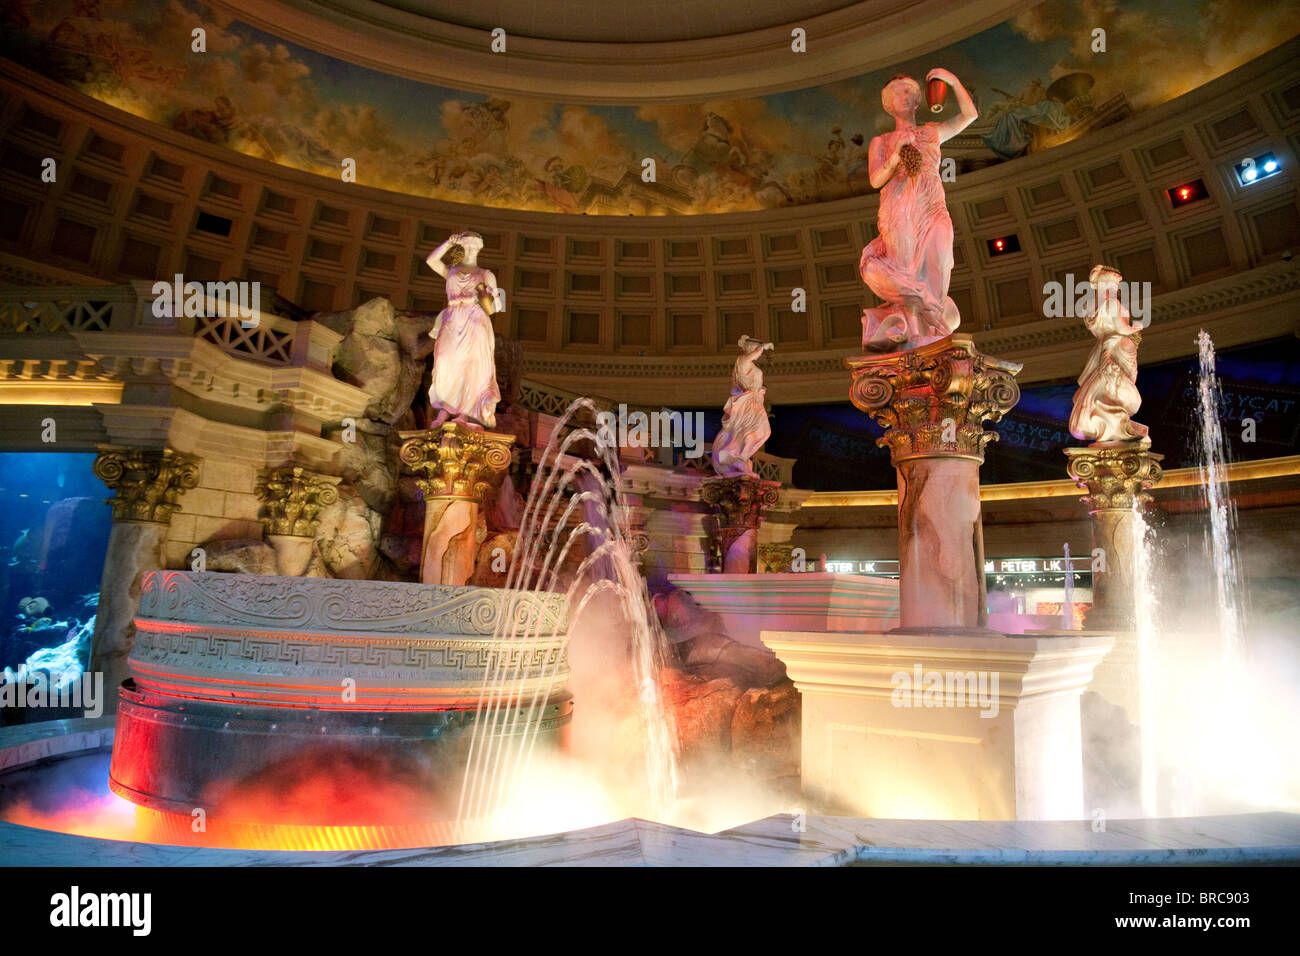 Las Vegas, JUN 3, 2021 - Interior View Of The Forum Shops, Caesars Palace  Stock Photo, Picture and Royalty Free Image. Image 170961375.